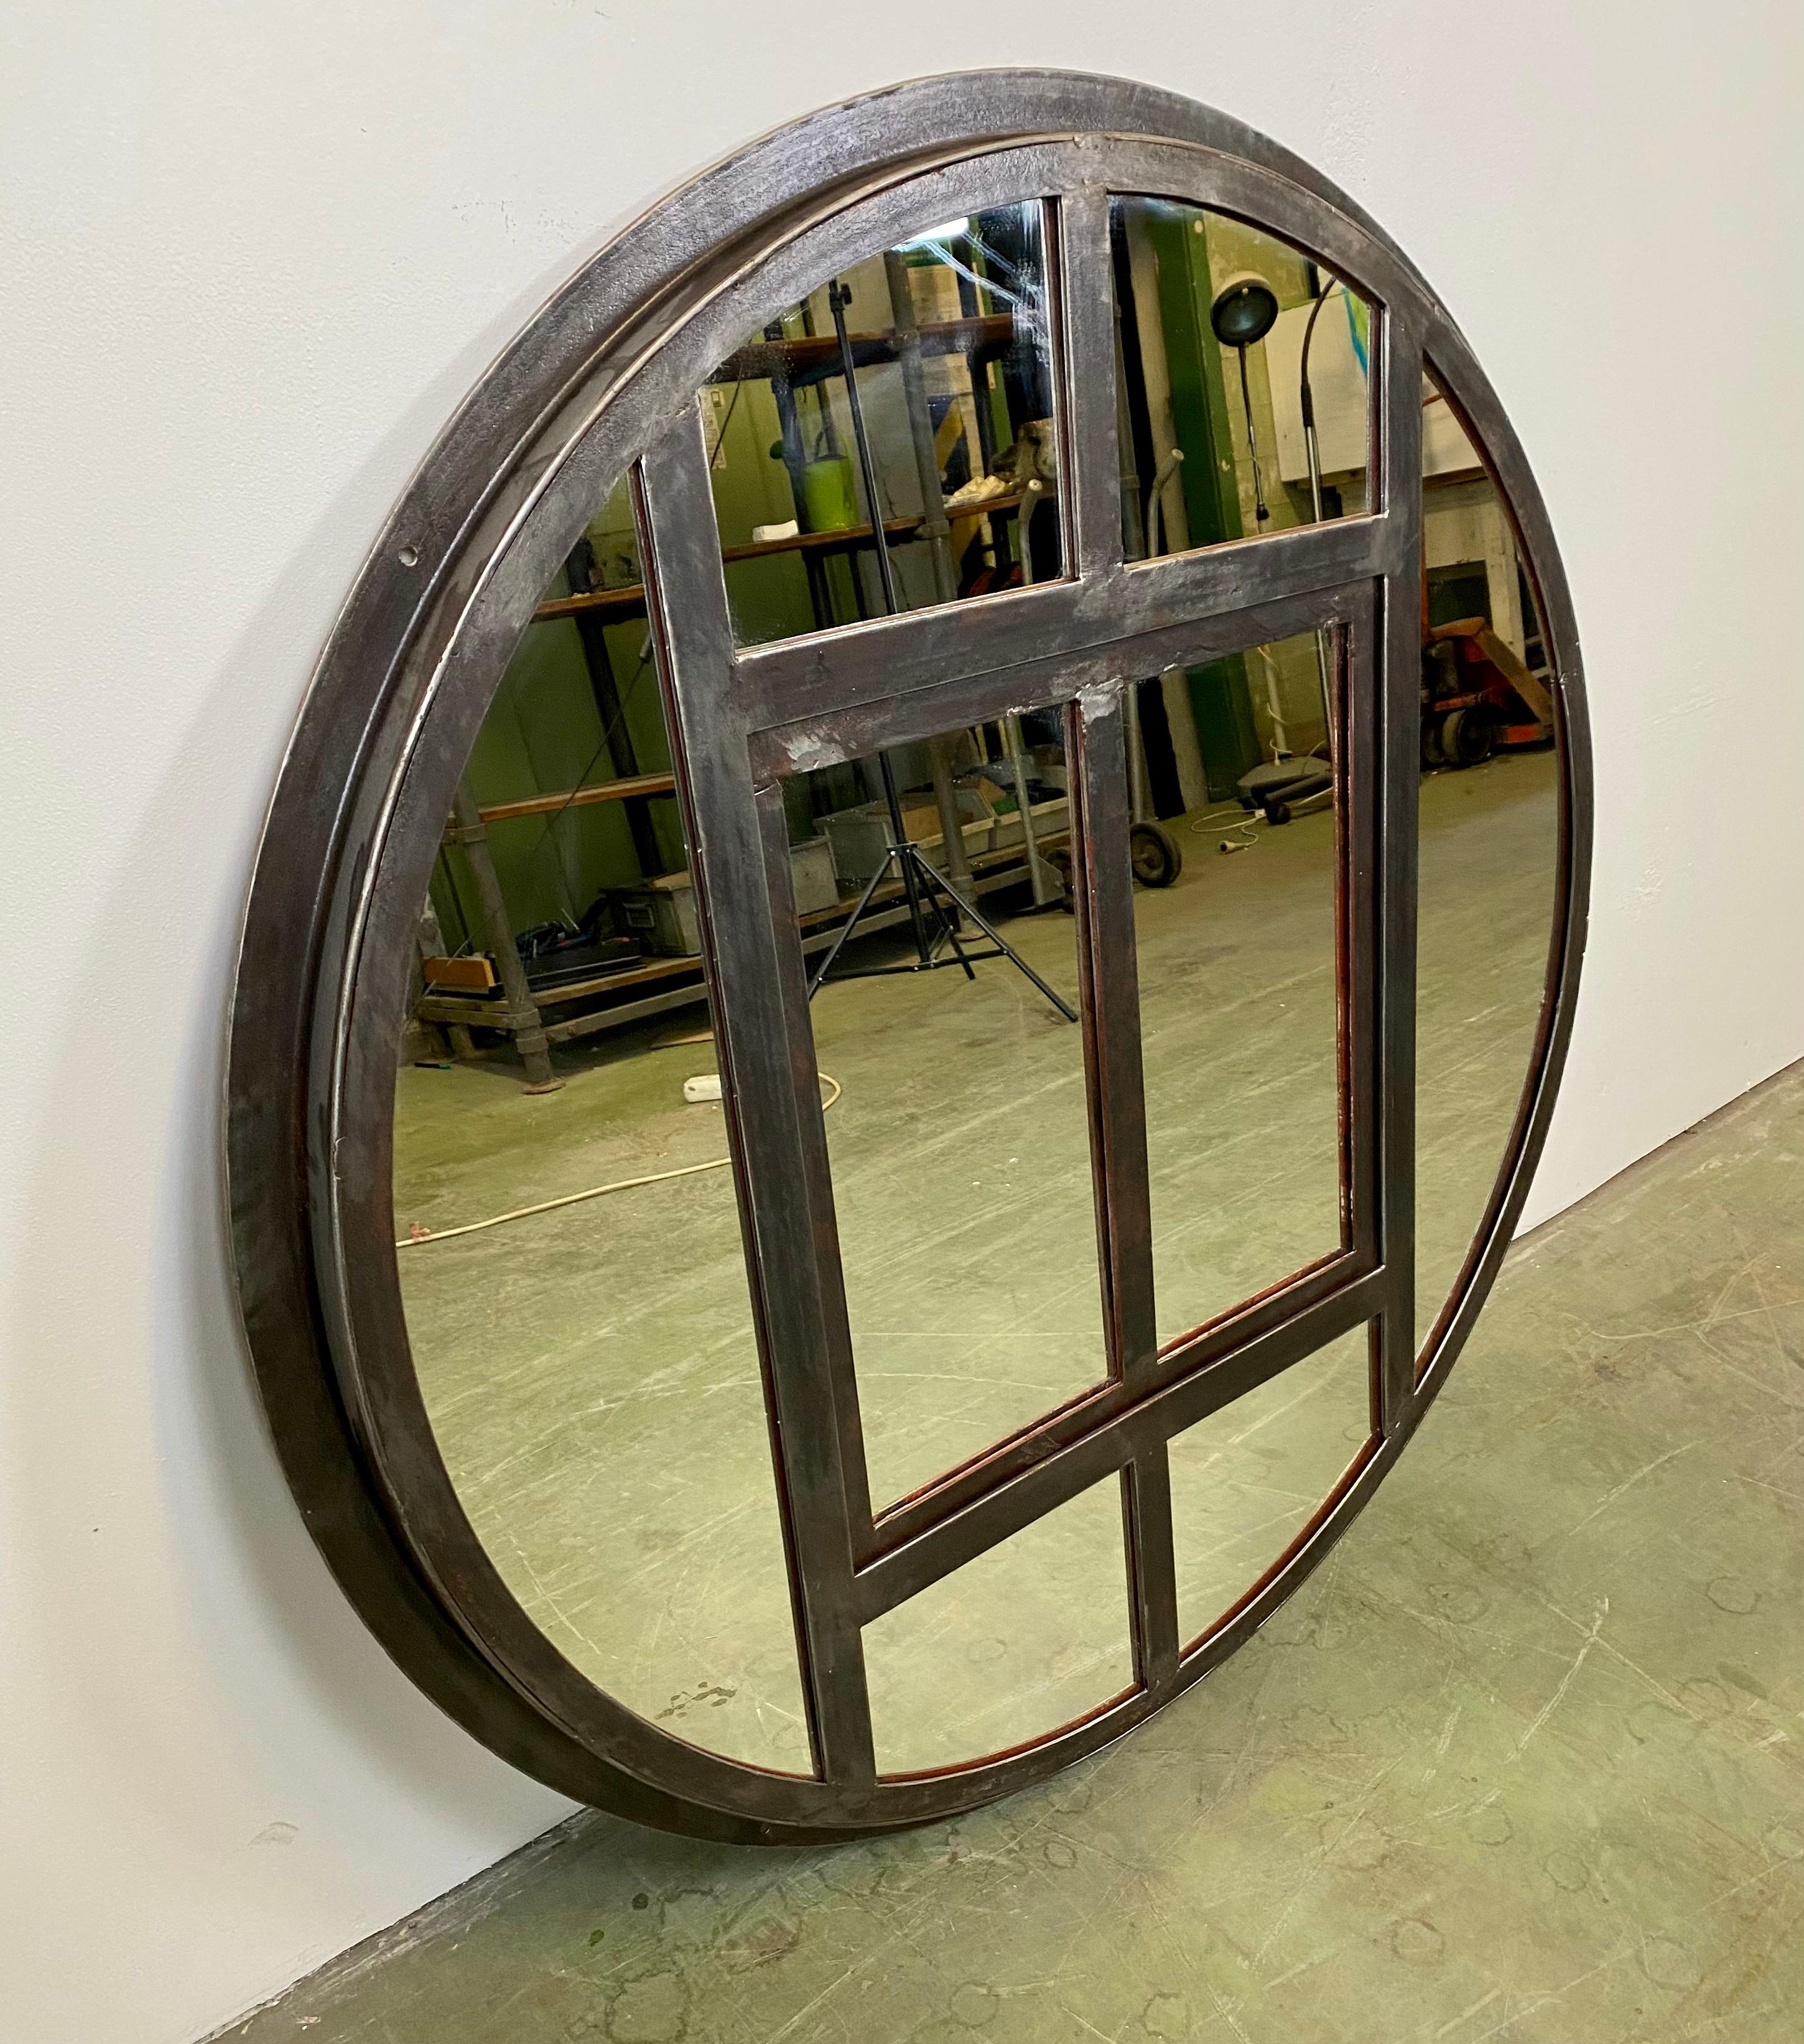 Czech Industrial Circle Iron Window with Mirror, 1950s